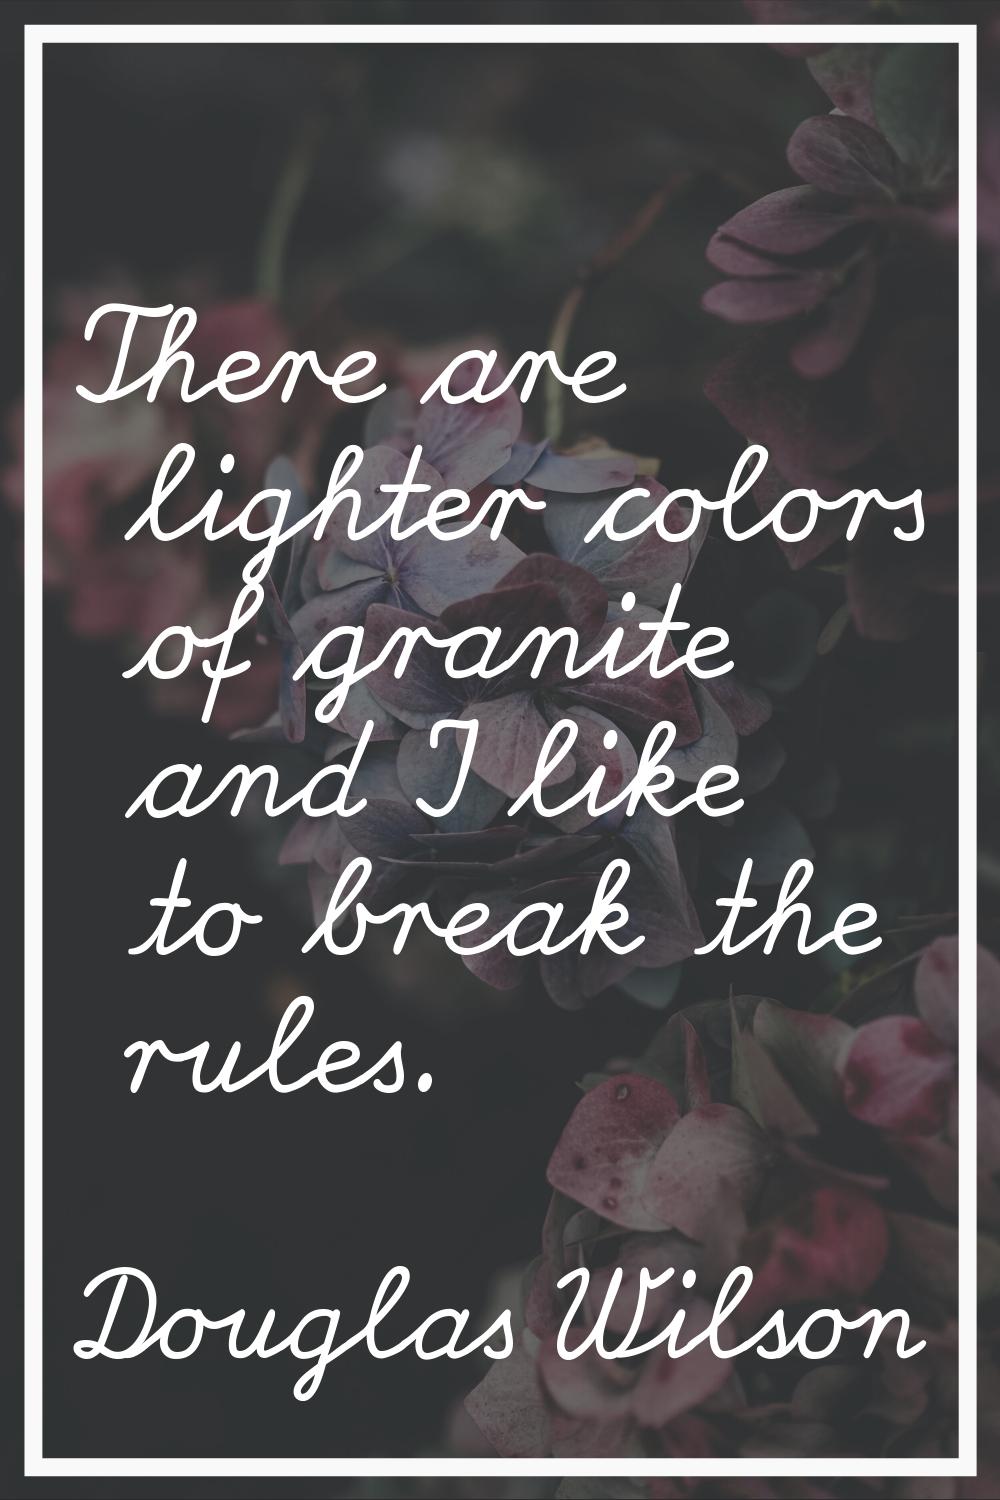 There are lighter colors of granite and I like to break the rules.